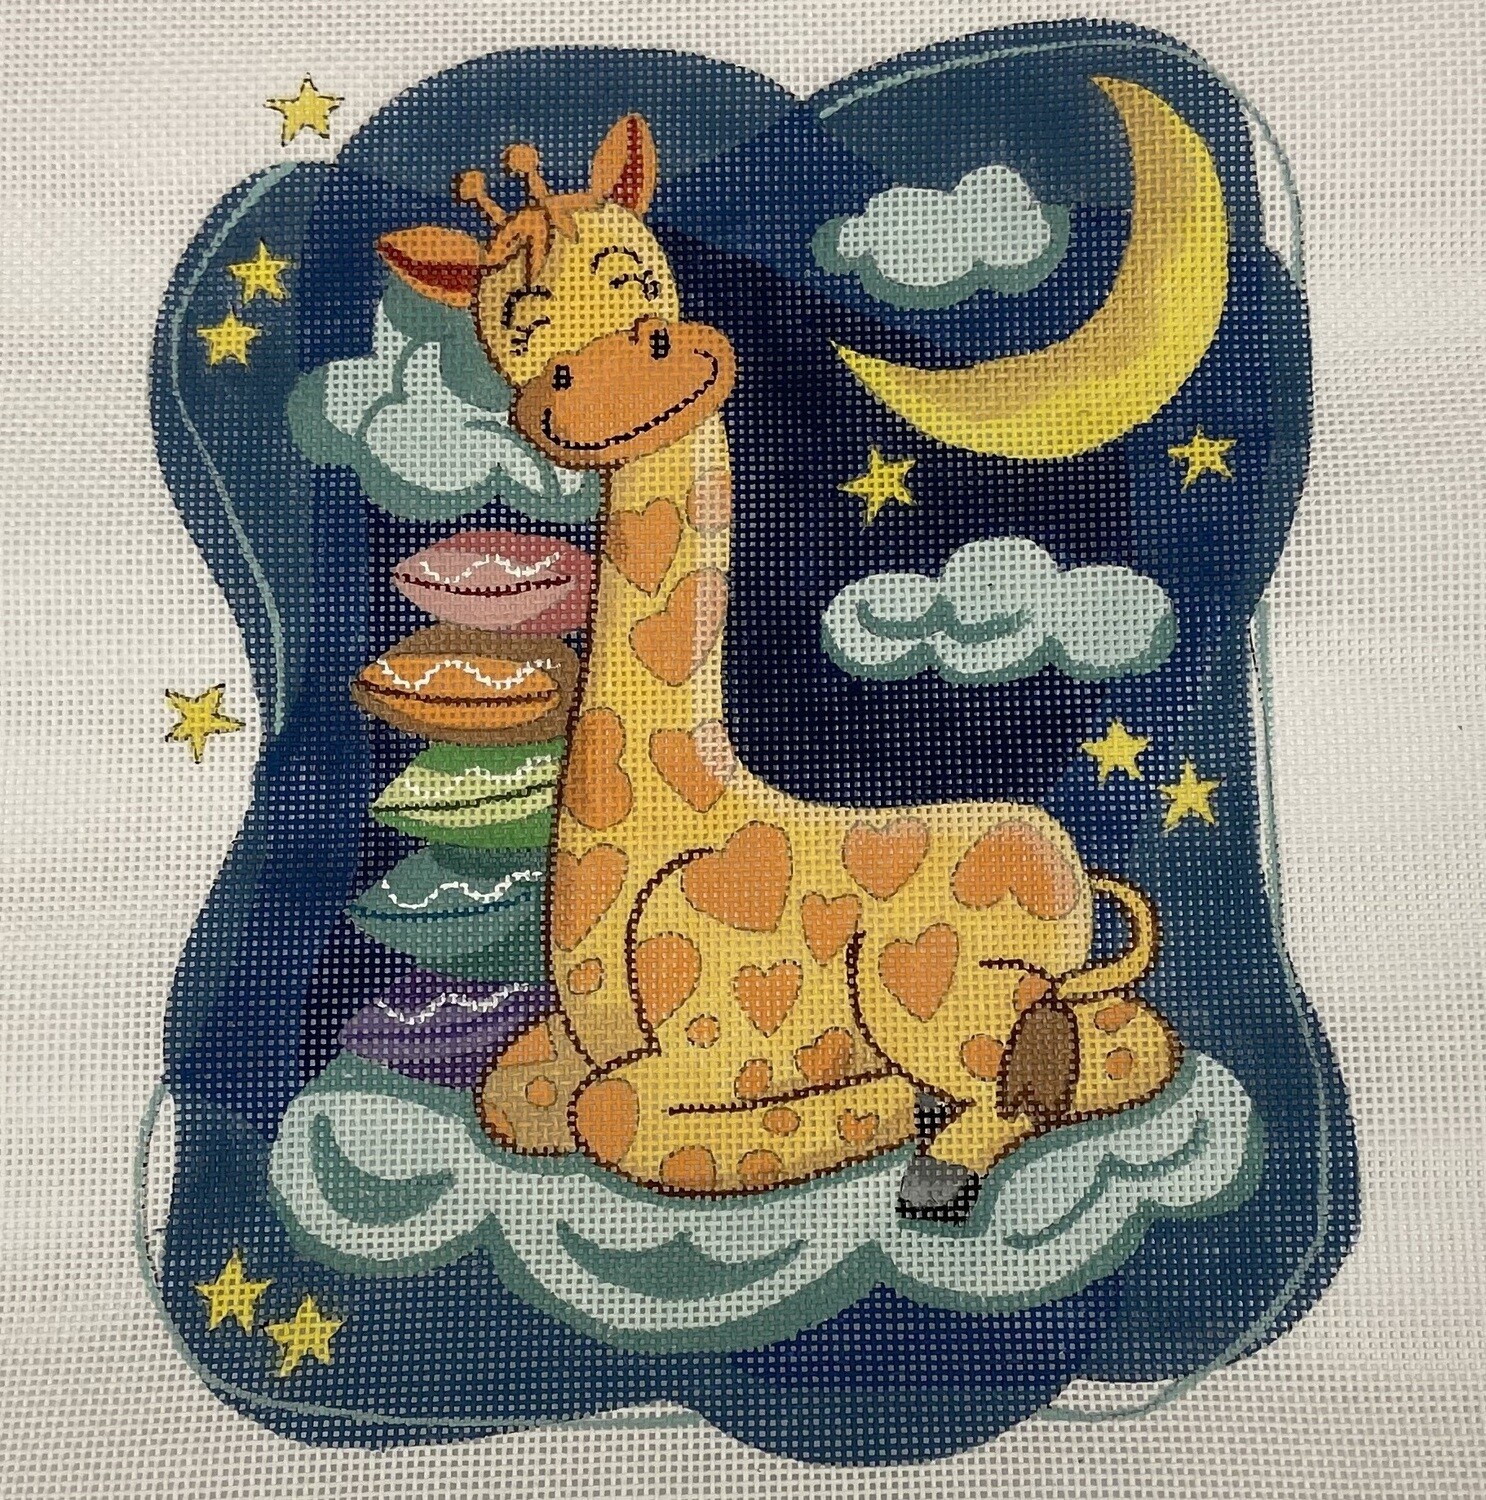 Sleeping Giraffe (Handpainted from Alice Peterson)*Product may take longer than usual to arrive*